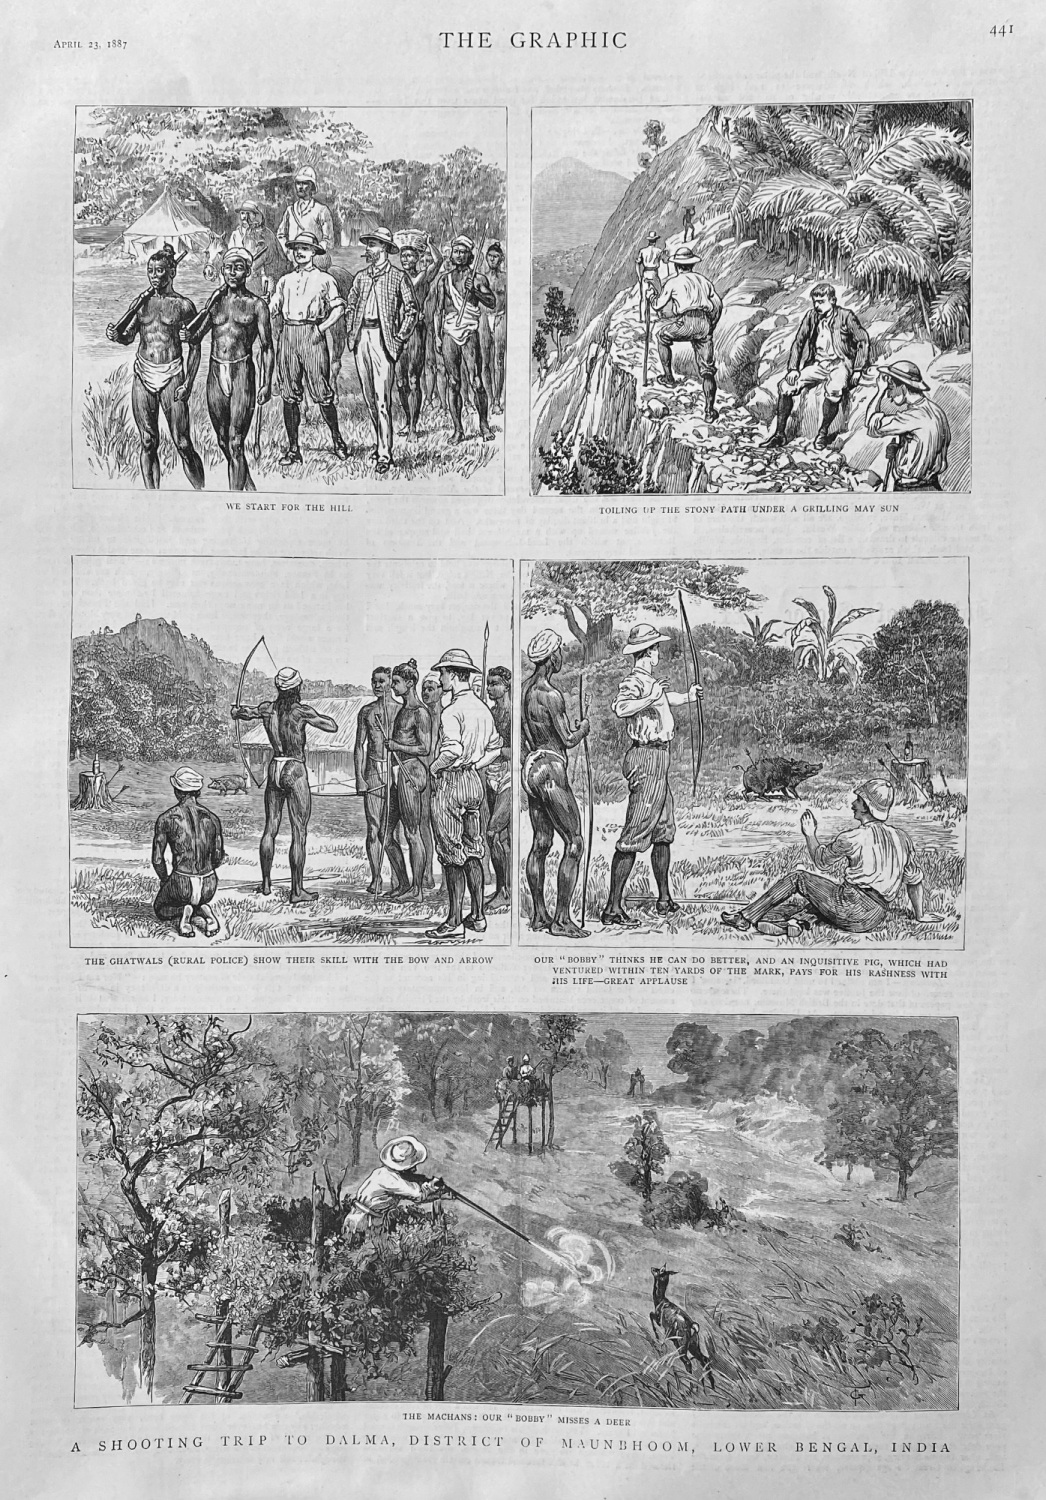 A Shooting trip to Dalma, District of Maunbhoom, Lower Bengal, India.  1887